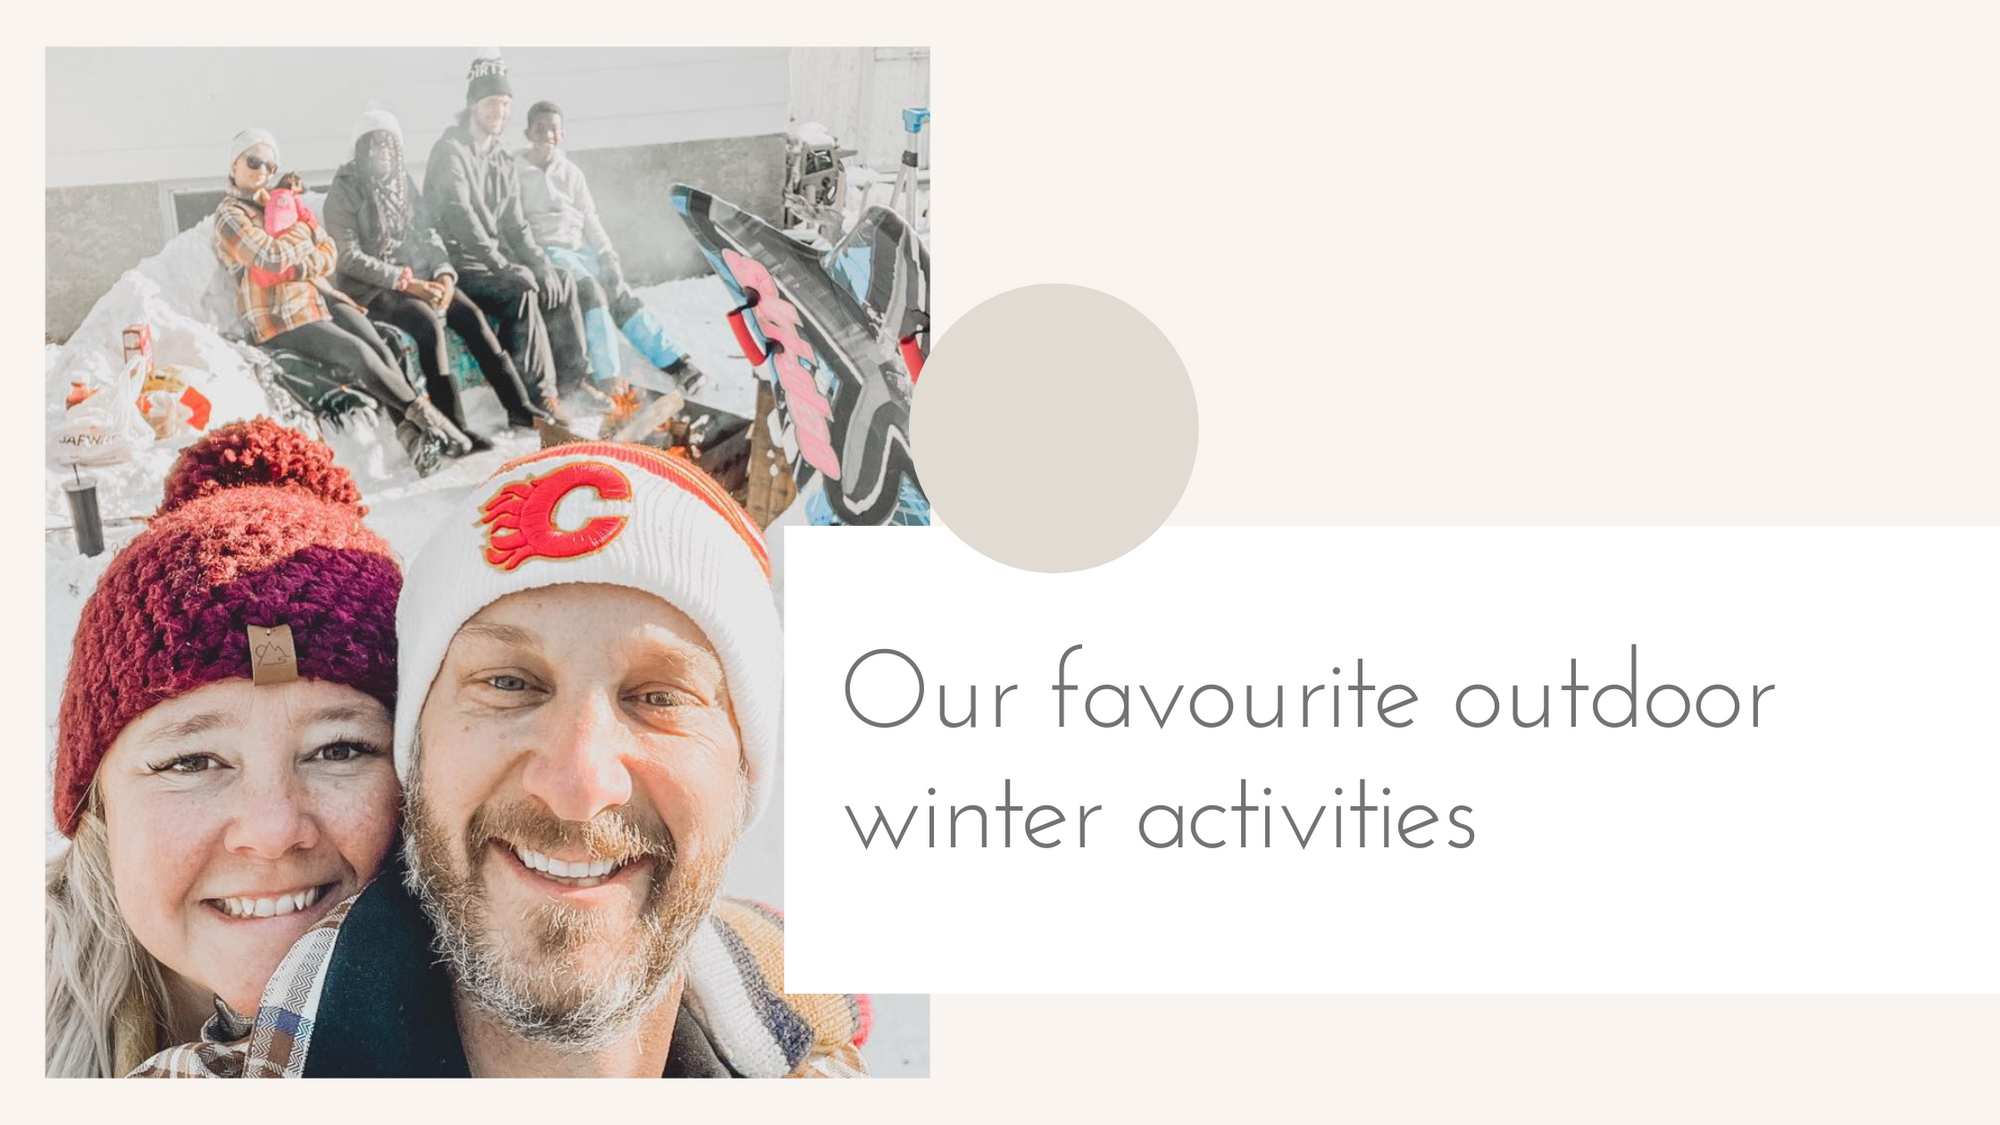 Our favourite outdoor winter activities